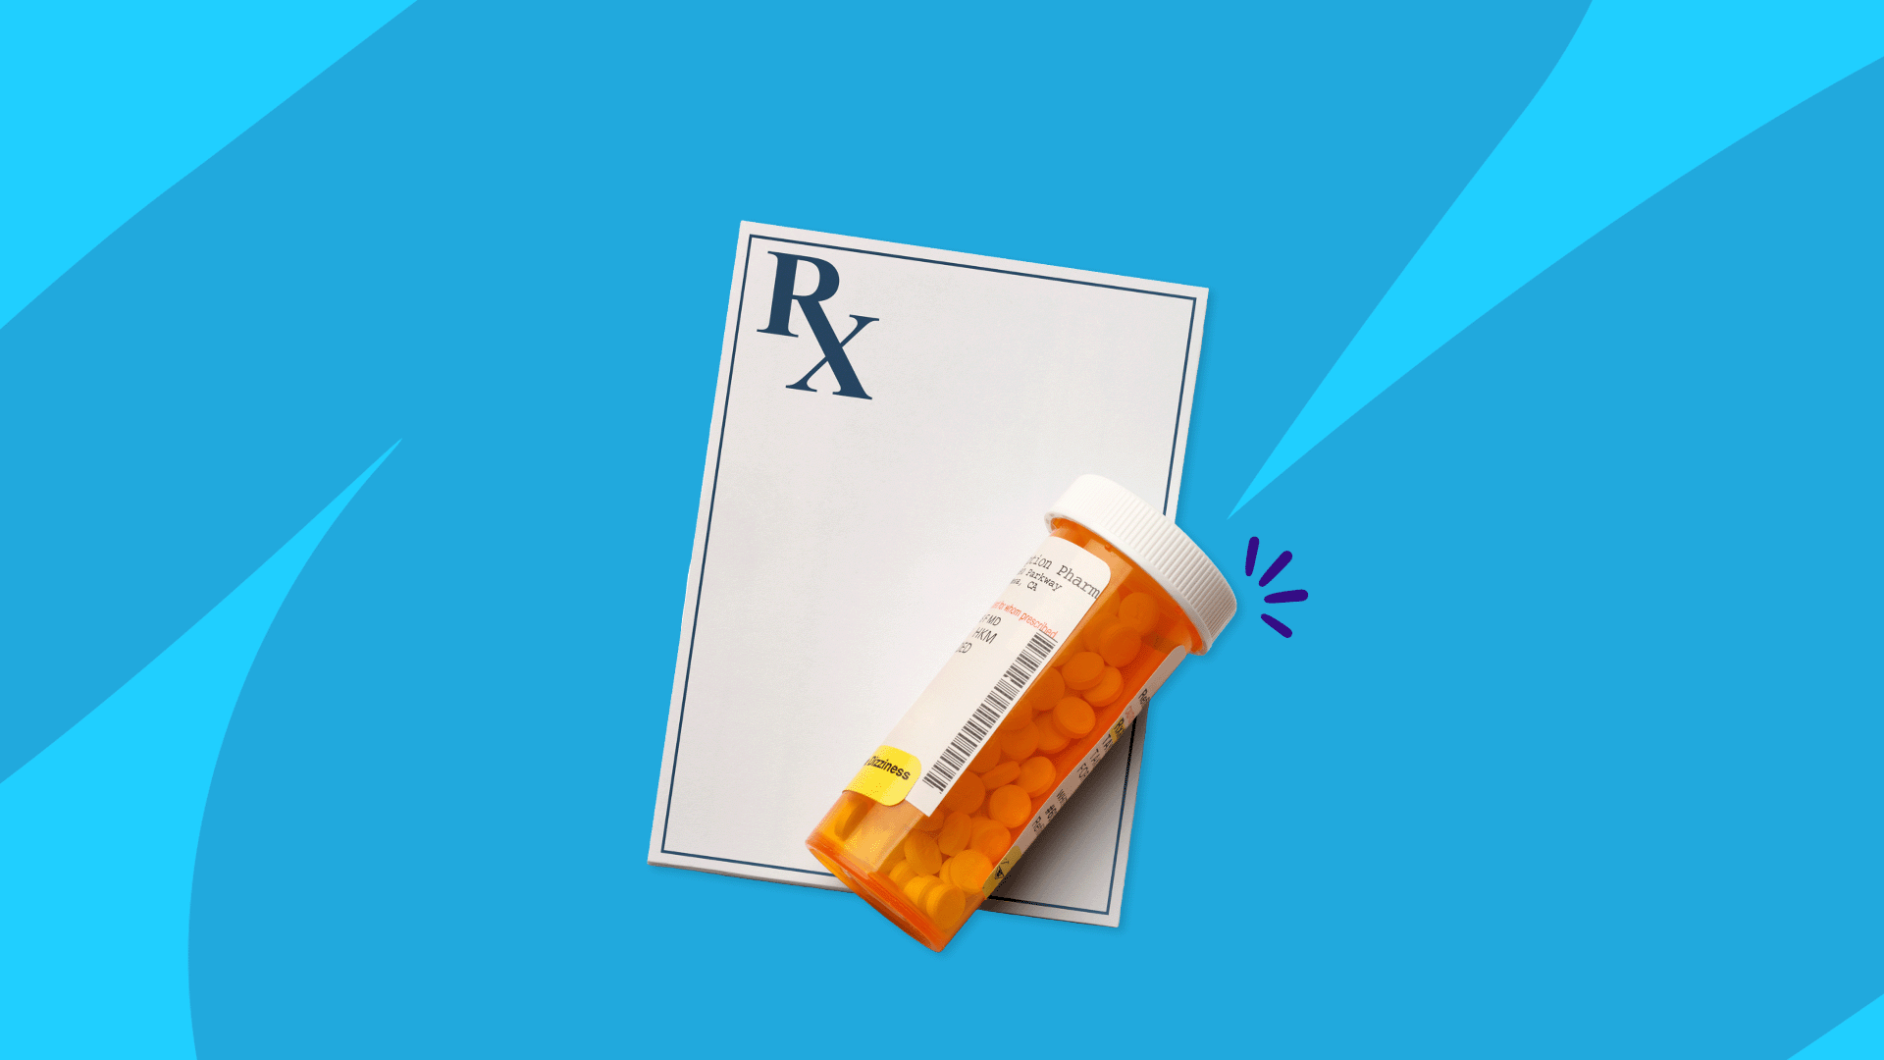 Rx pill bottle and prescription pad: Fluvoxamine side effects and how to avoid them